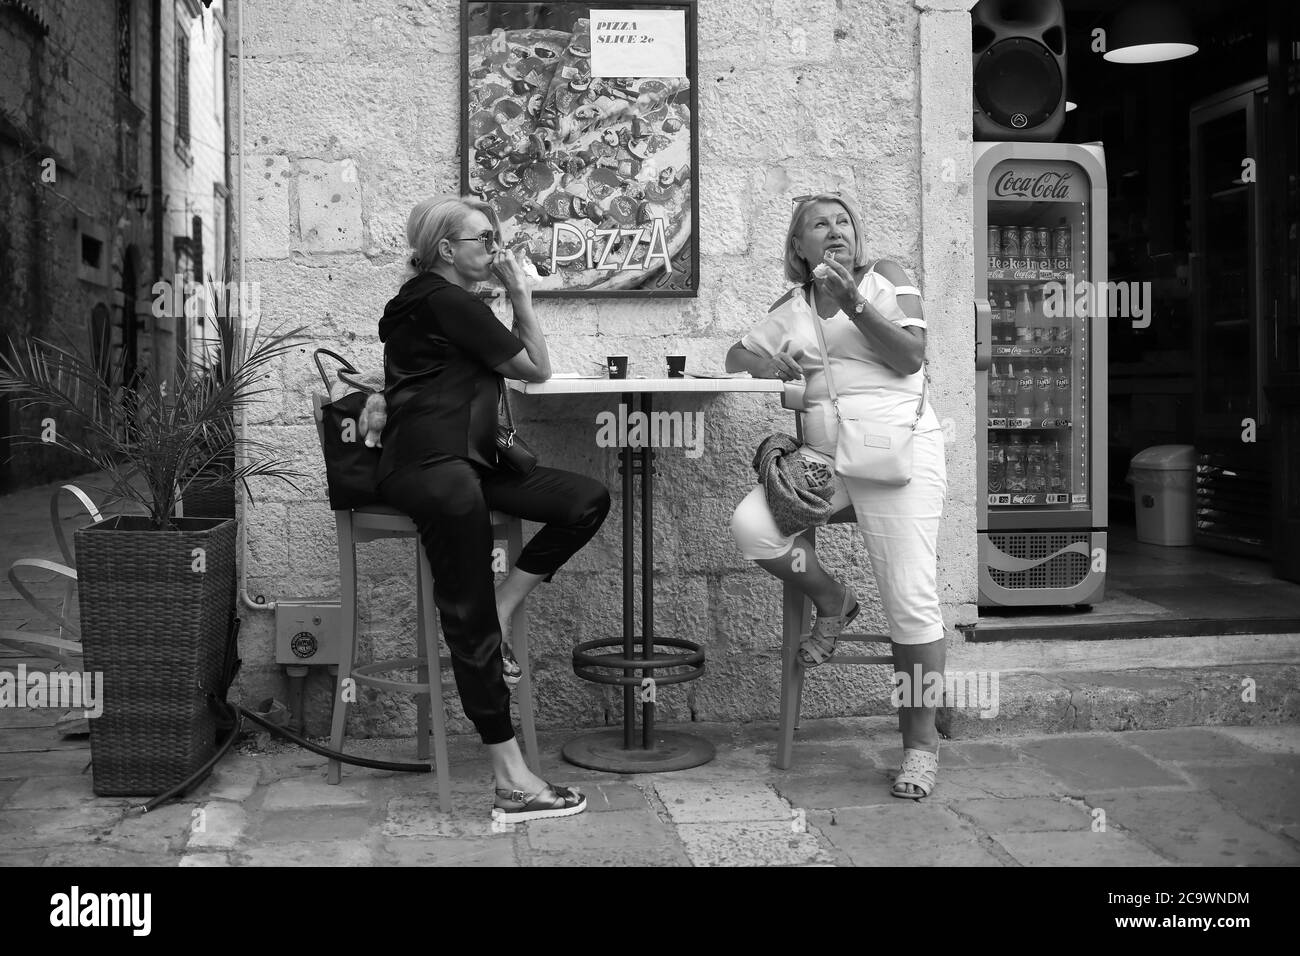 Montenegro, Sep 22, 2019: Street scene with two women having snack and coffee at an outdoor cafe in Kotor Old Town (B/W) Stock Photo